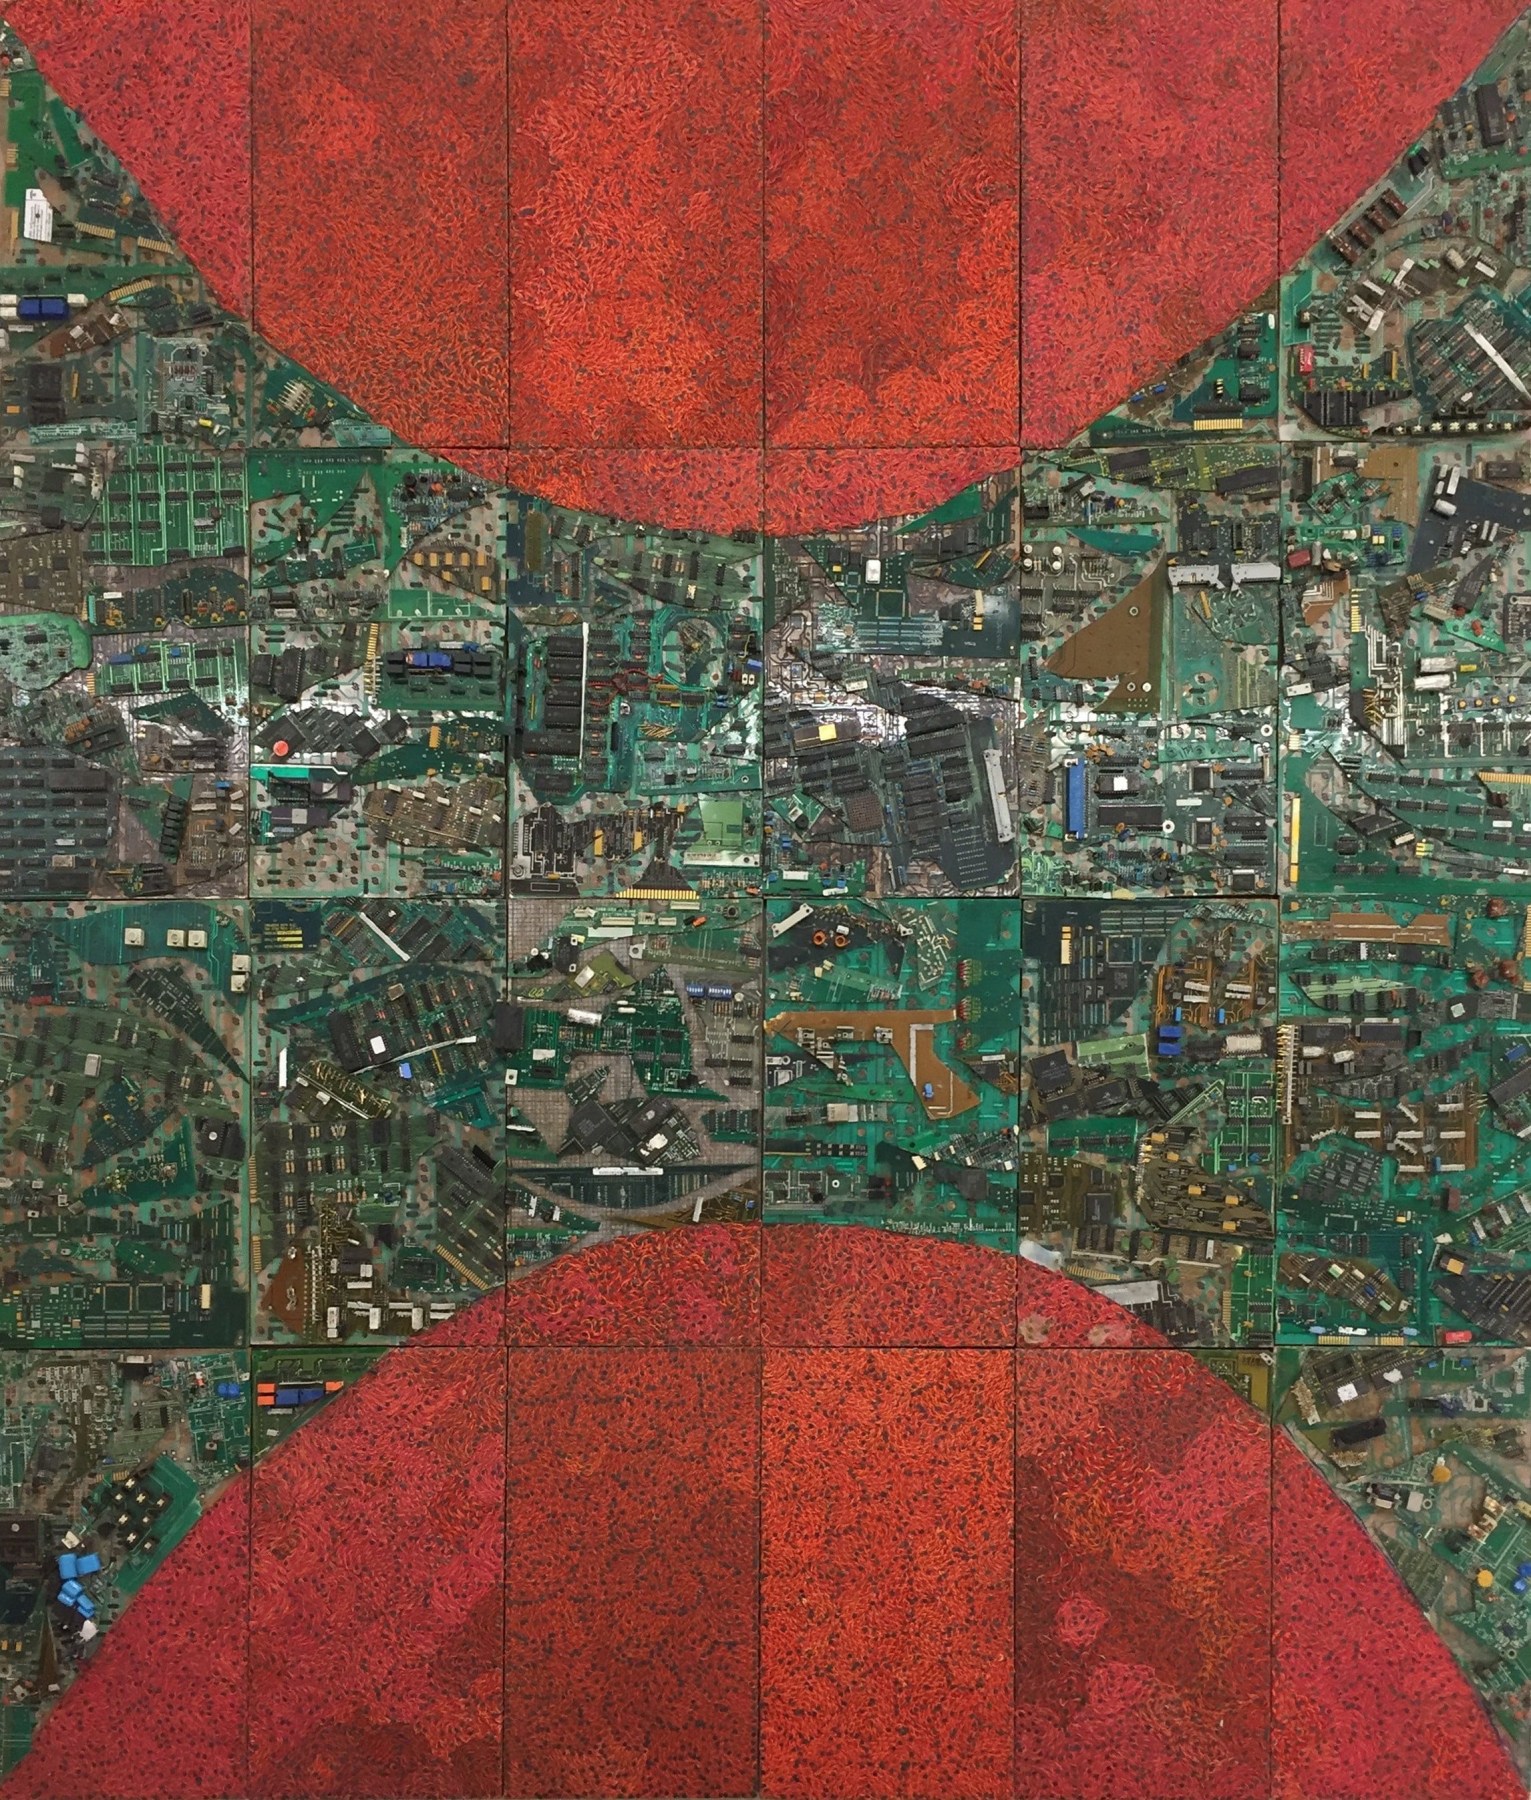 red semi-circles on two ends of the canvas with a green middle, all composed of electronic components